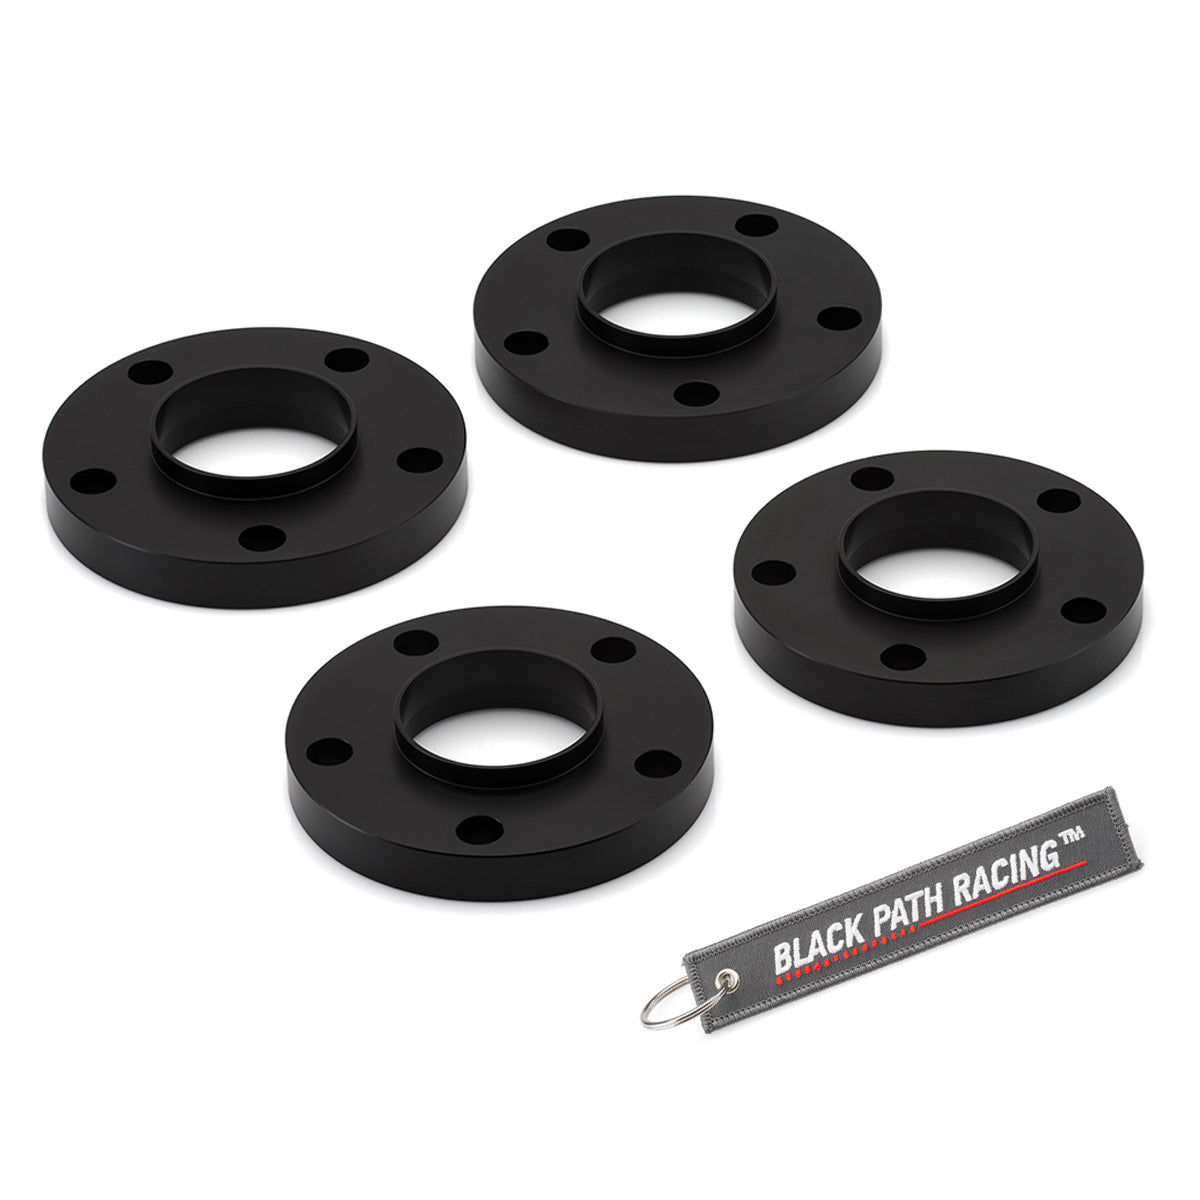 2004-2017 BMW 5 Series E60 E61 M5 5x120 Hubcentric Wheelcentric Wheel Spacers set of 4